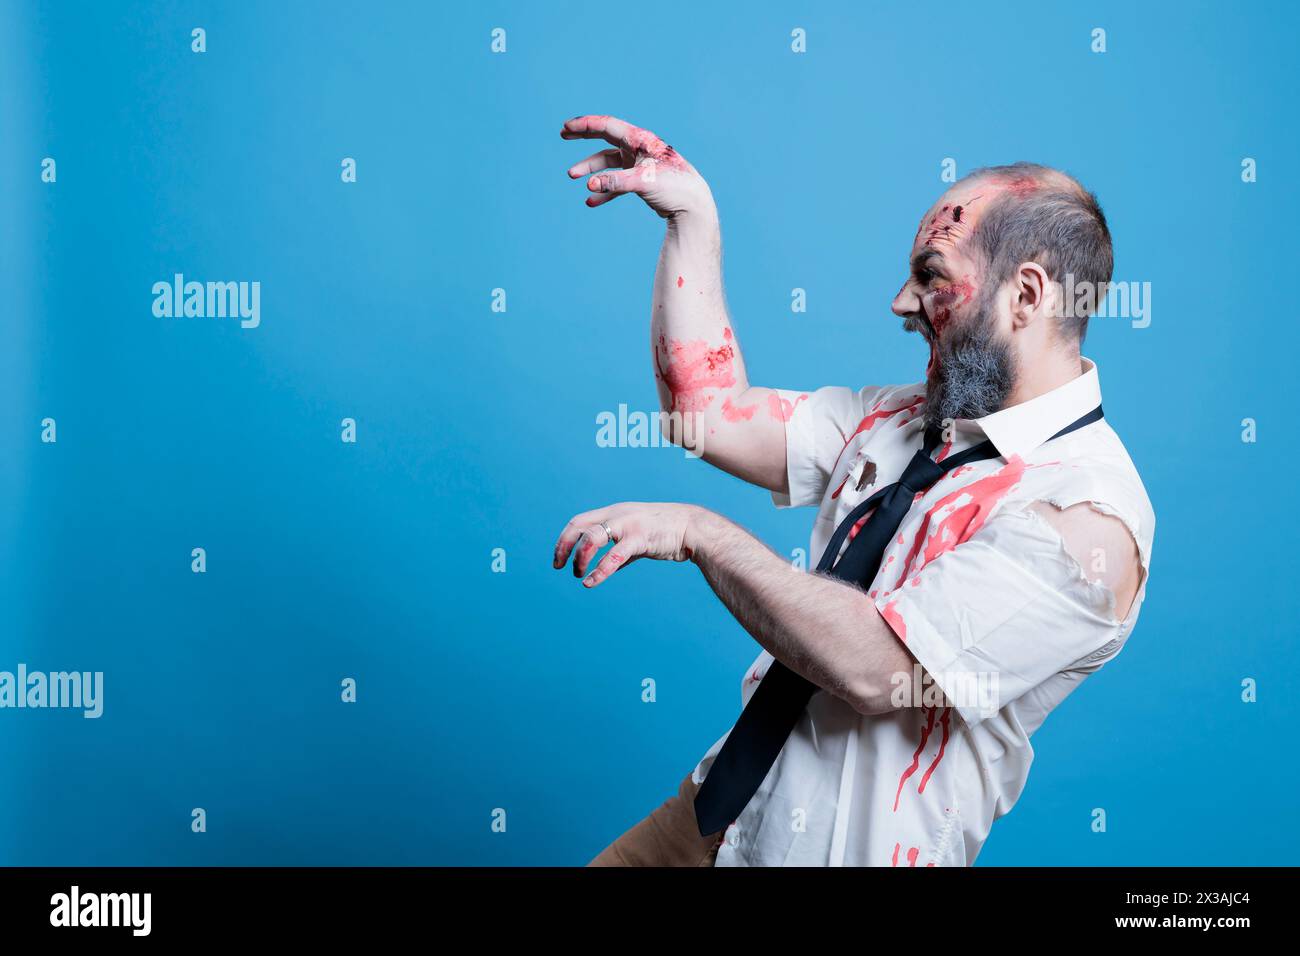 Starving undead zombie hissing and looking for human brains, haunting victims. Walking dead cadaver searching for flesh to consume, preparing for attack with hands acting as claws, studio background Stock Photo